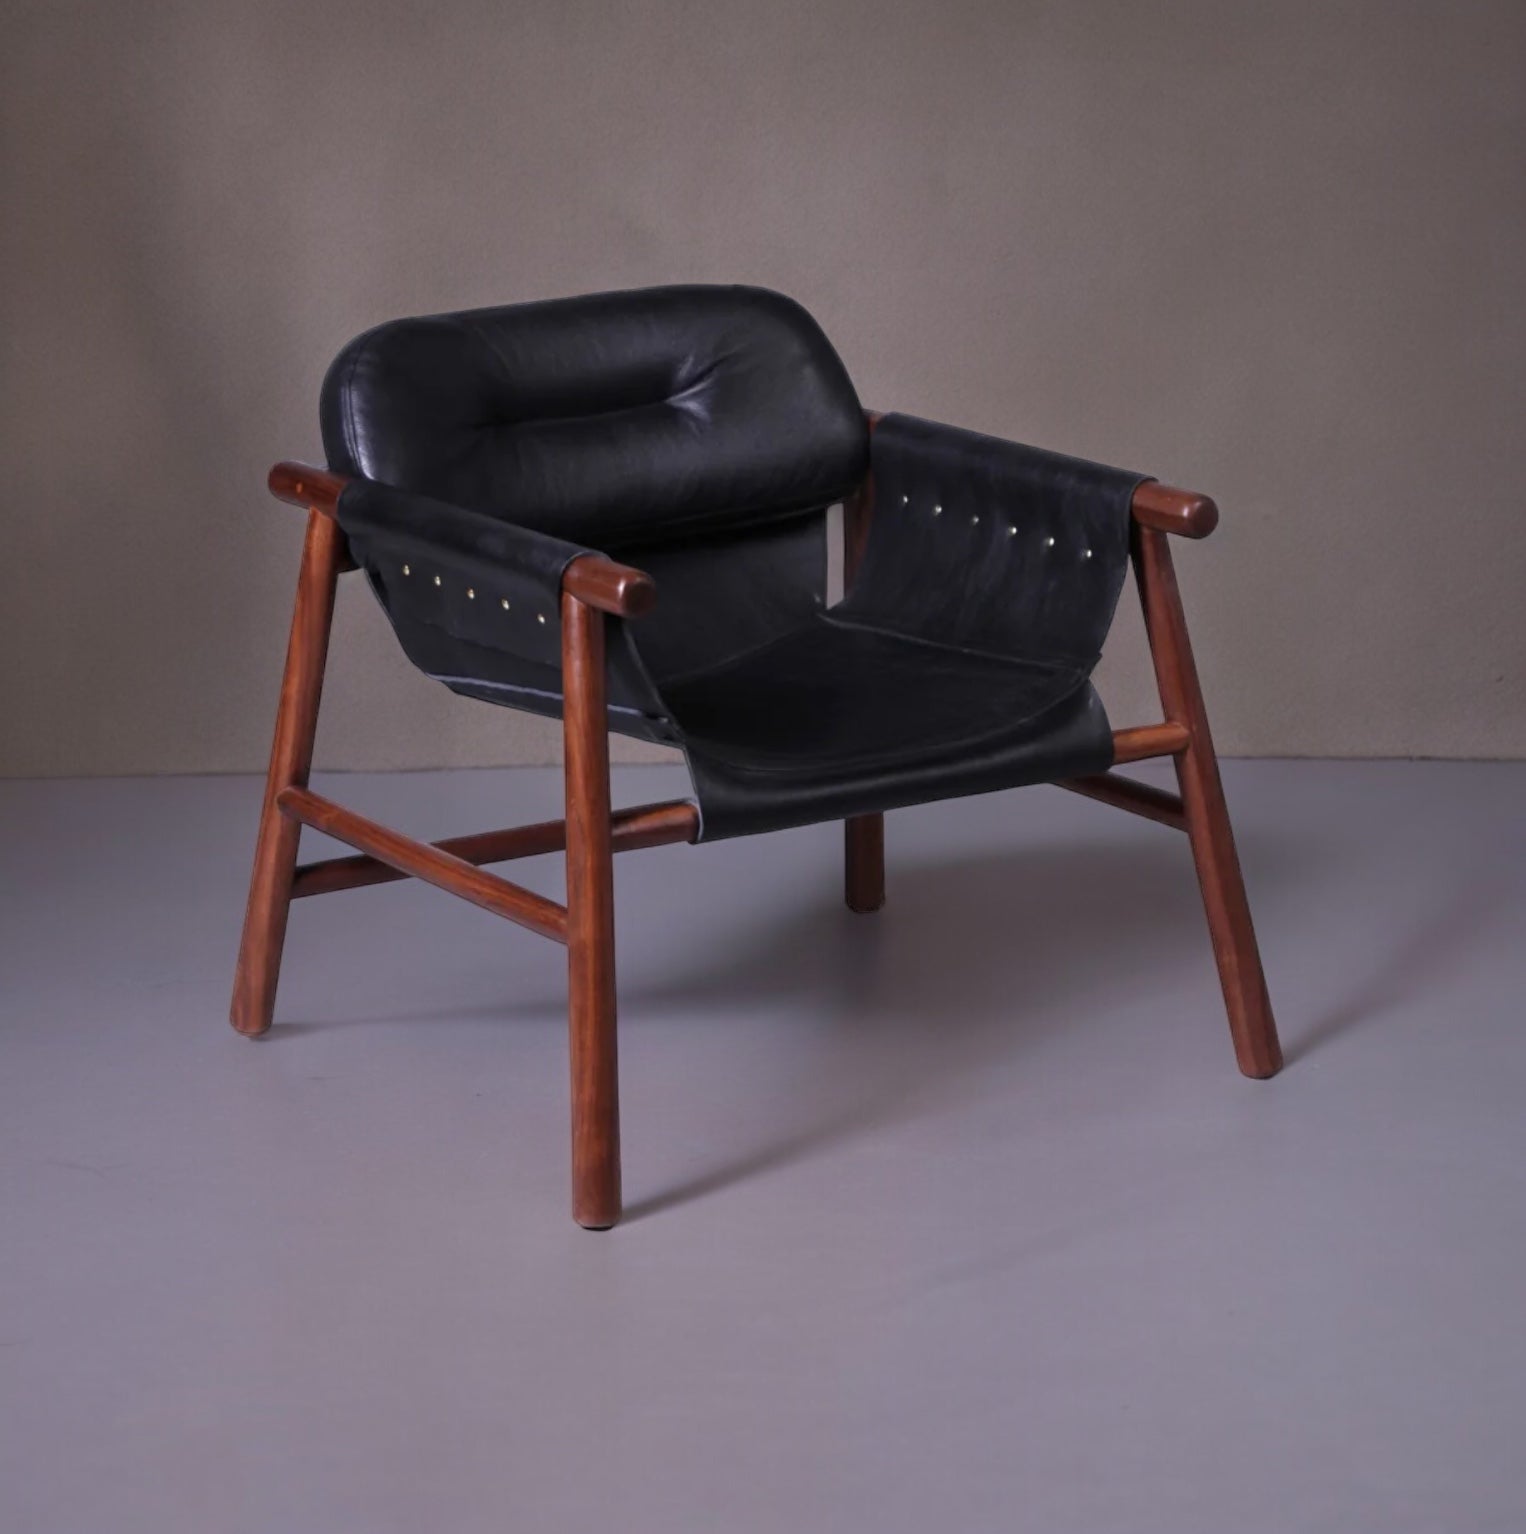 Fiordo Lounge Chair by KAO